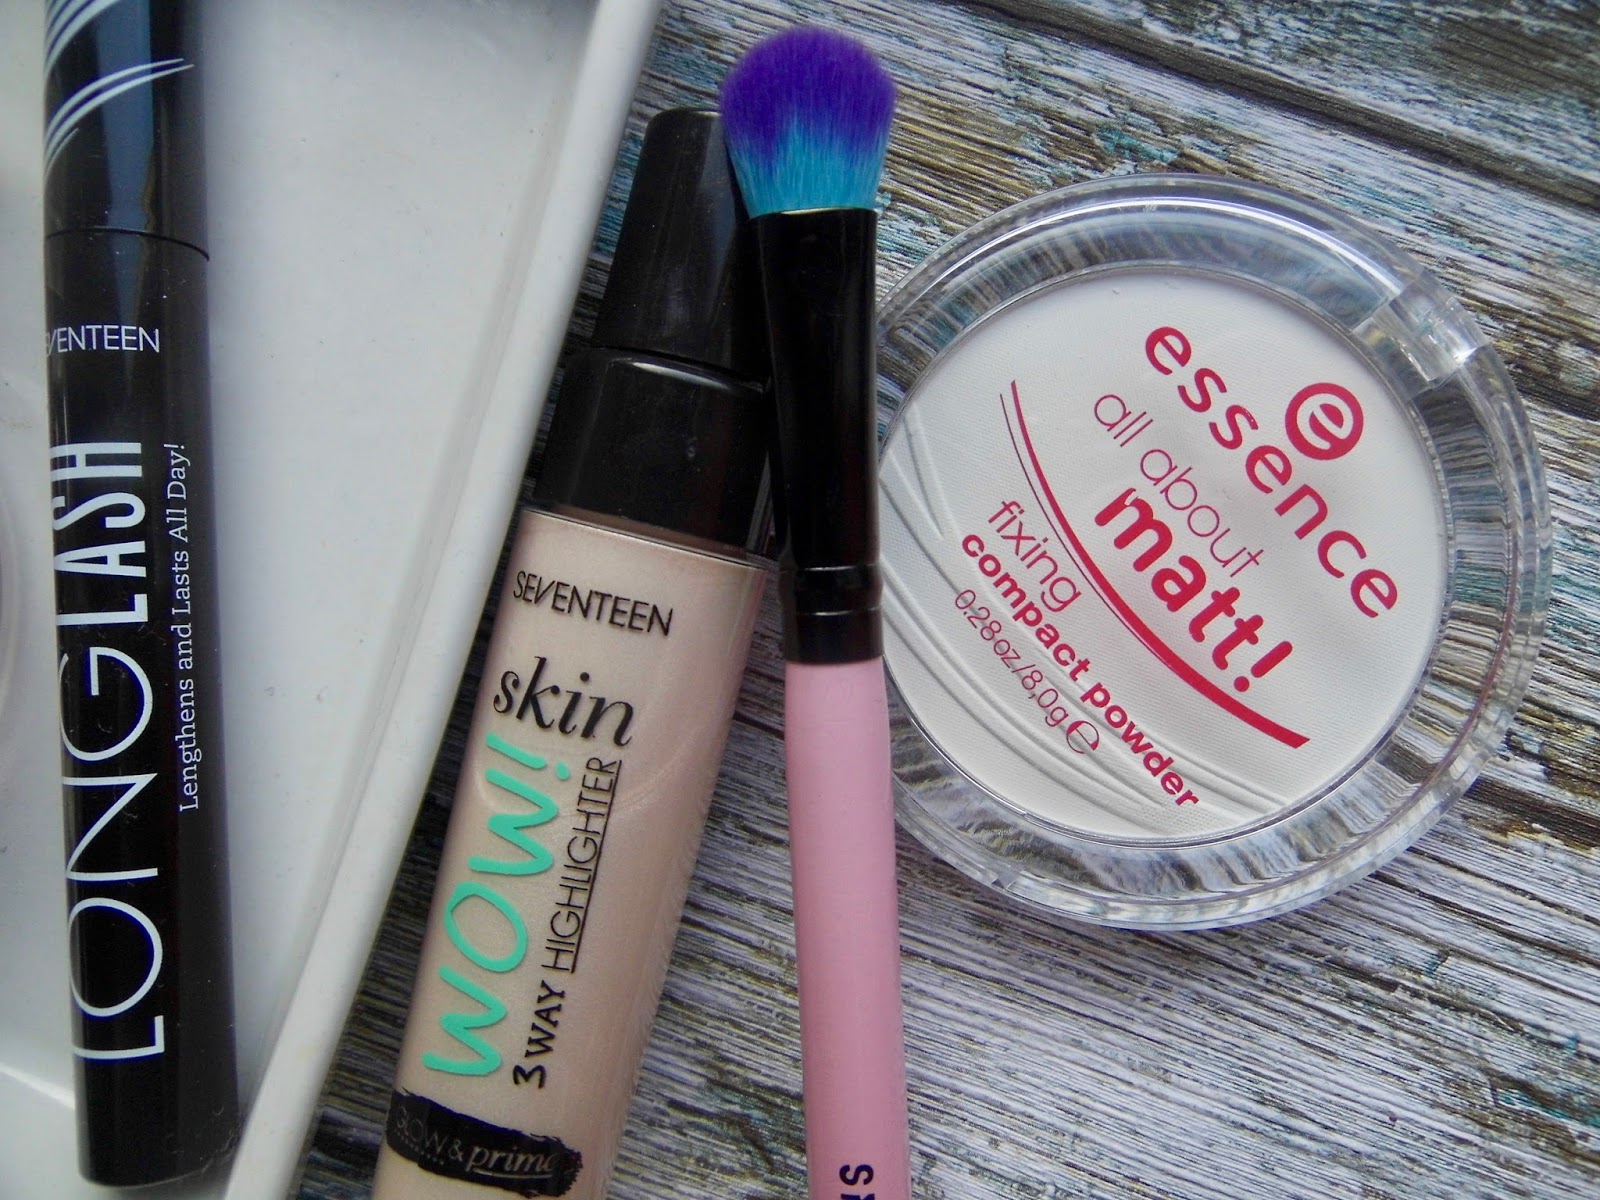 Items I have Repurchased